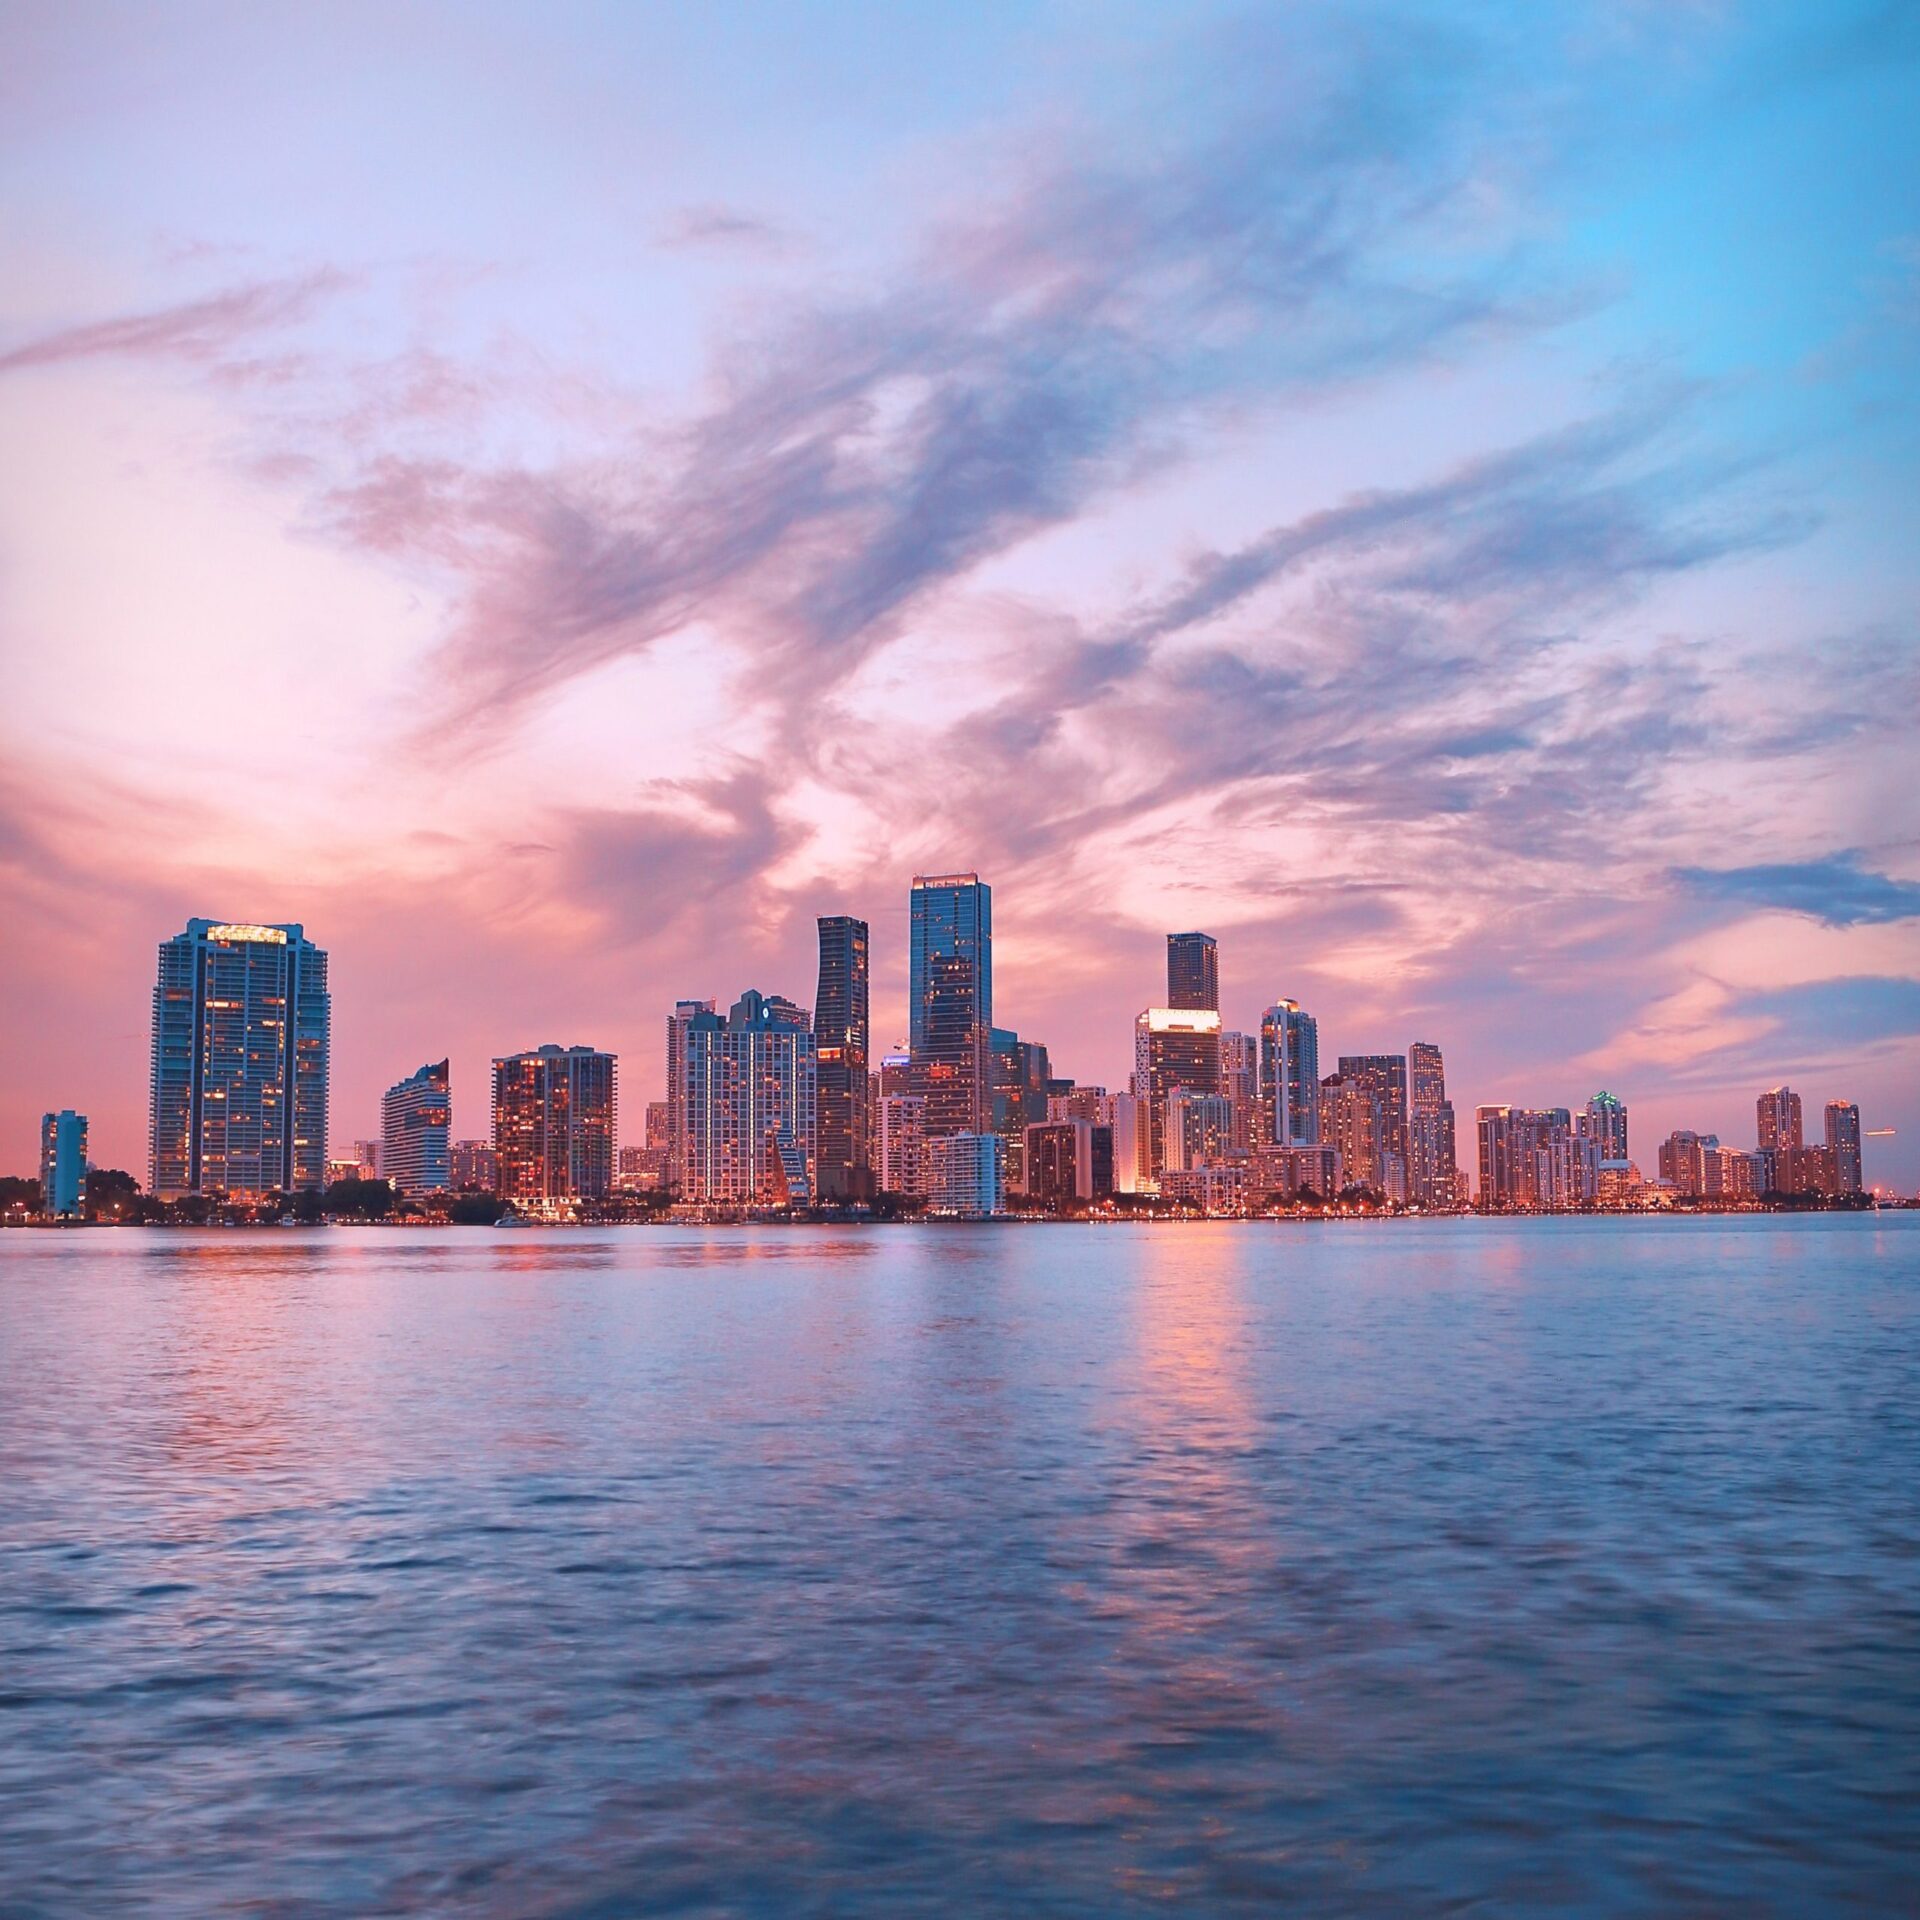 Miami and Tampa Florida are both emerging tech hubs.